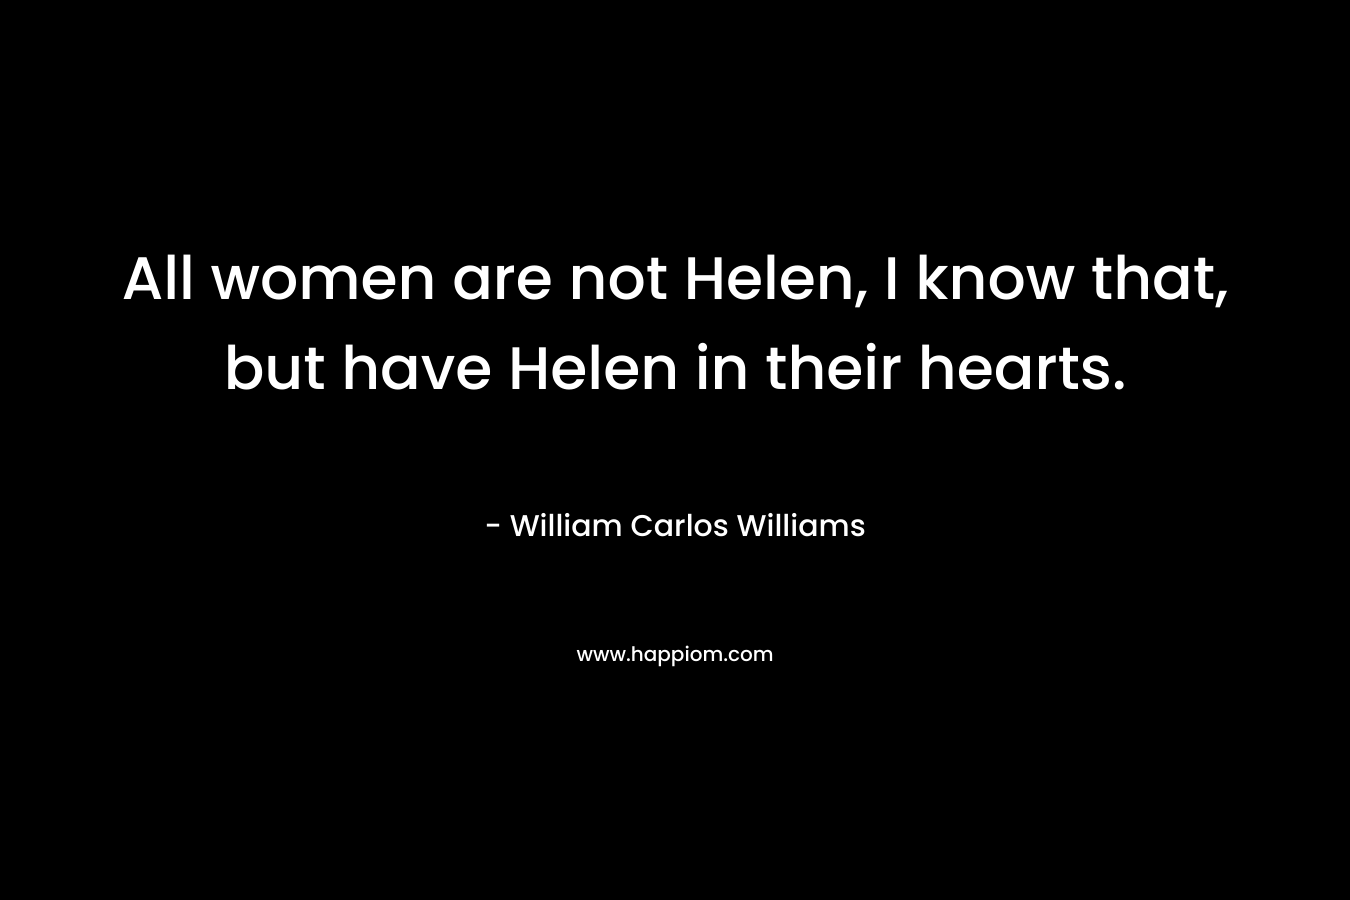 All women are not Helen, I know that, but have Helen in their hearts.